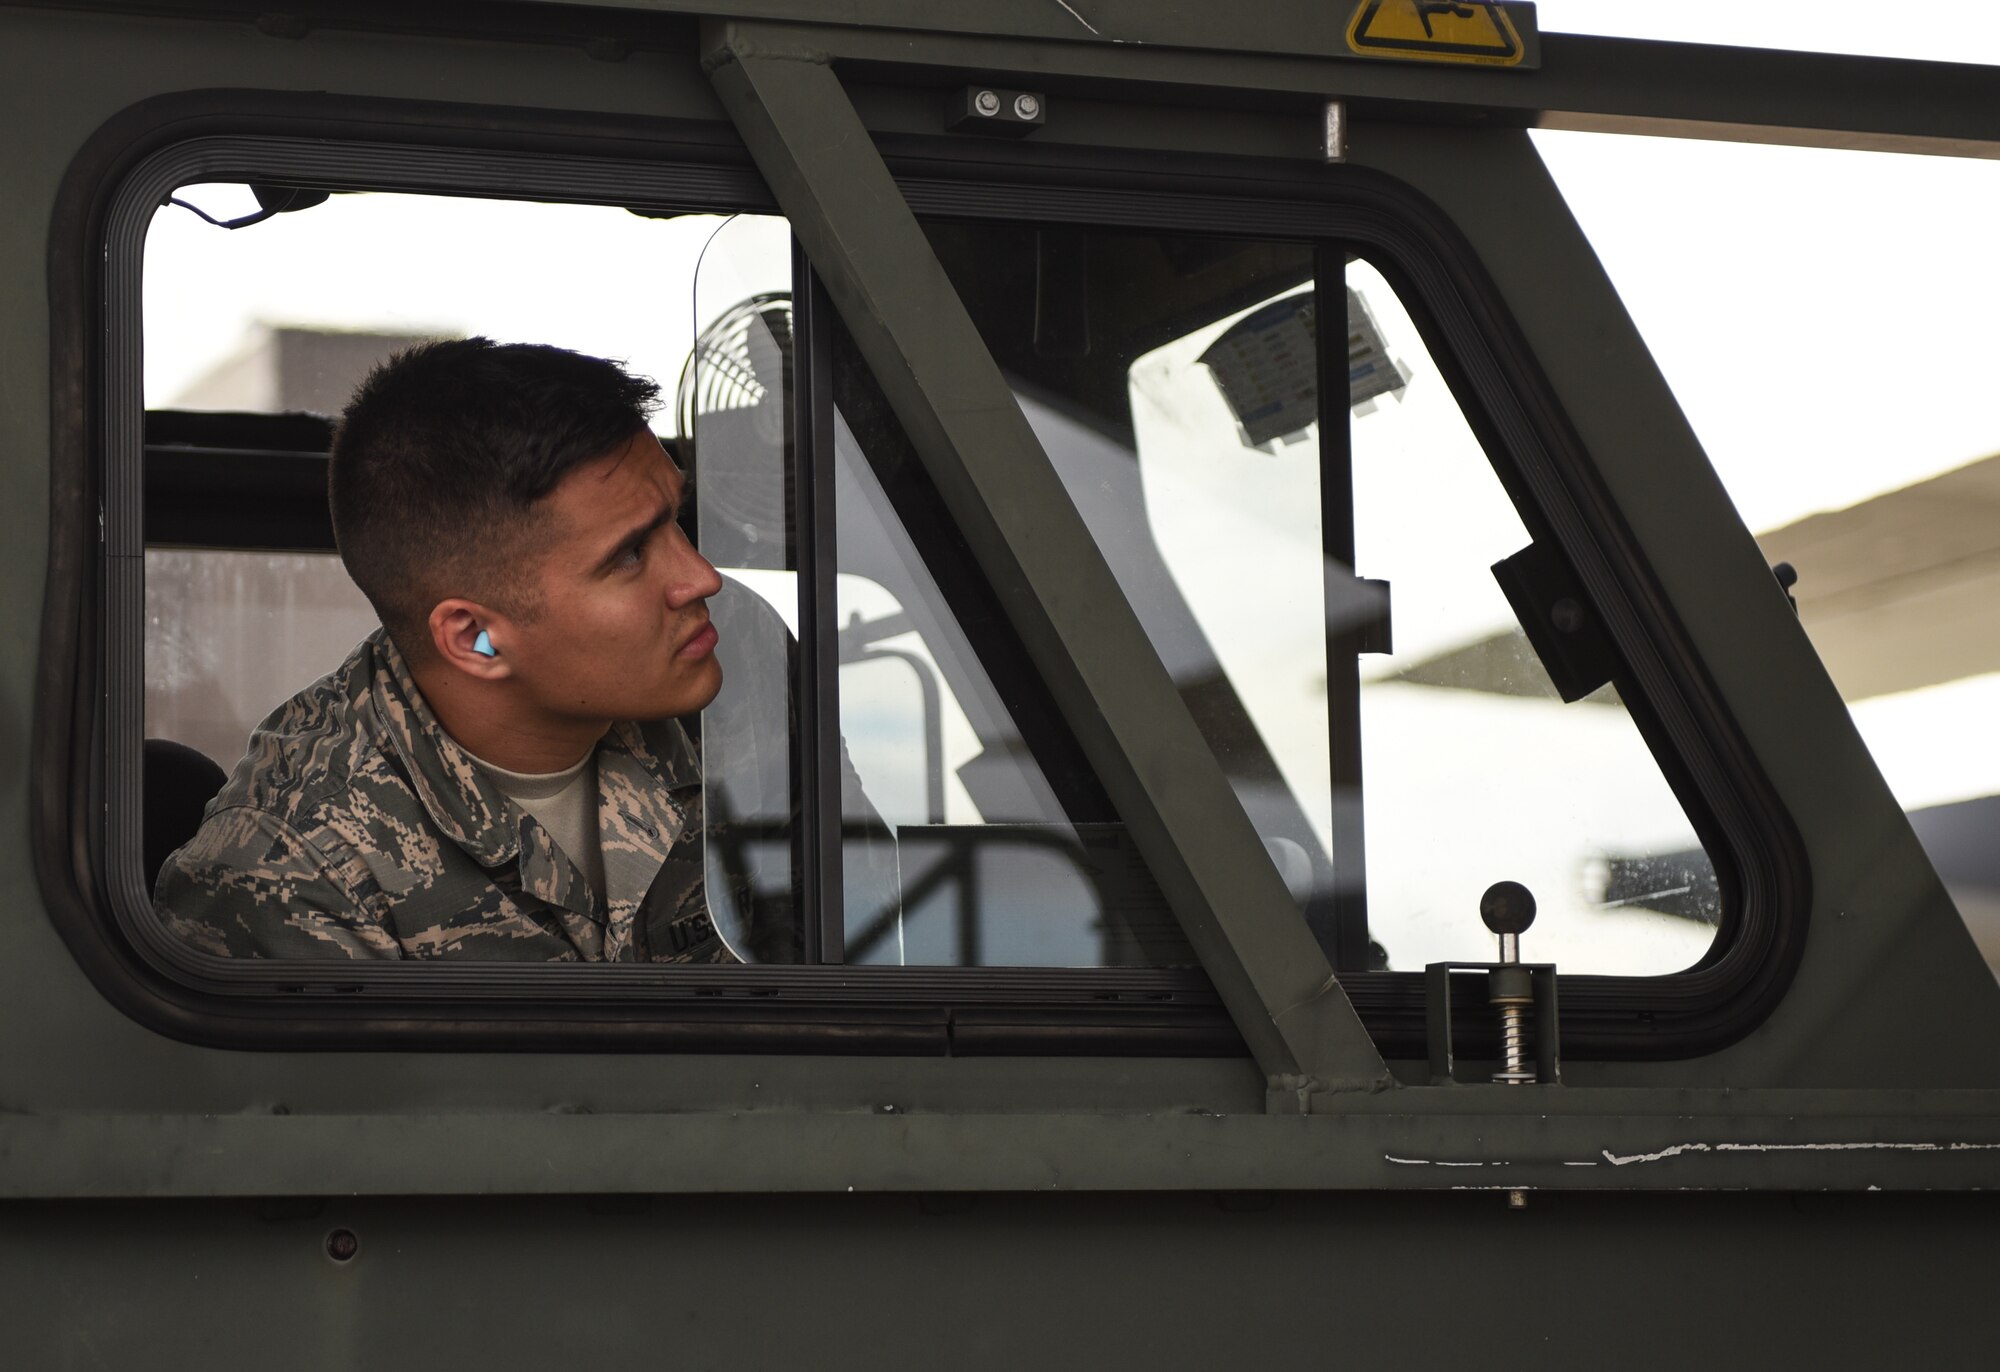 U.S. Air Force Airman First Class Jaxson Doyle, 733rd Logistics Readiness Squadron small air terminal representative, watches loading operations from the K-loader in support of recovery efforts for Tyndall Air Force Base, Florida, at Joint Base Langley-Eustis, Virginia, Oct. 17, 2018. The supplies and gear being loaded are for recovery efforts of Tyndall Air Force Base, Florida. (U.S. Air Force photo by Staff Sgt. Carlin Leslie/Released)